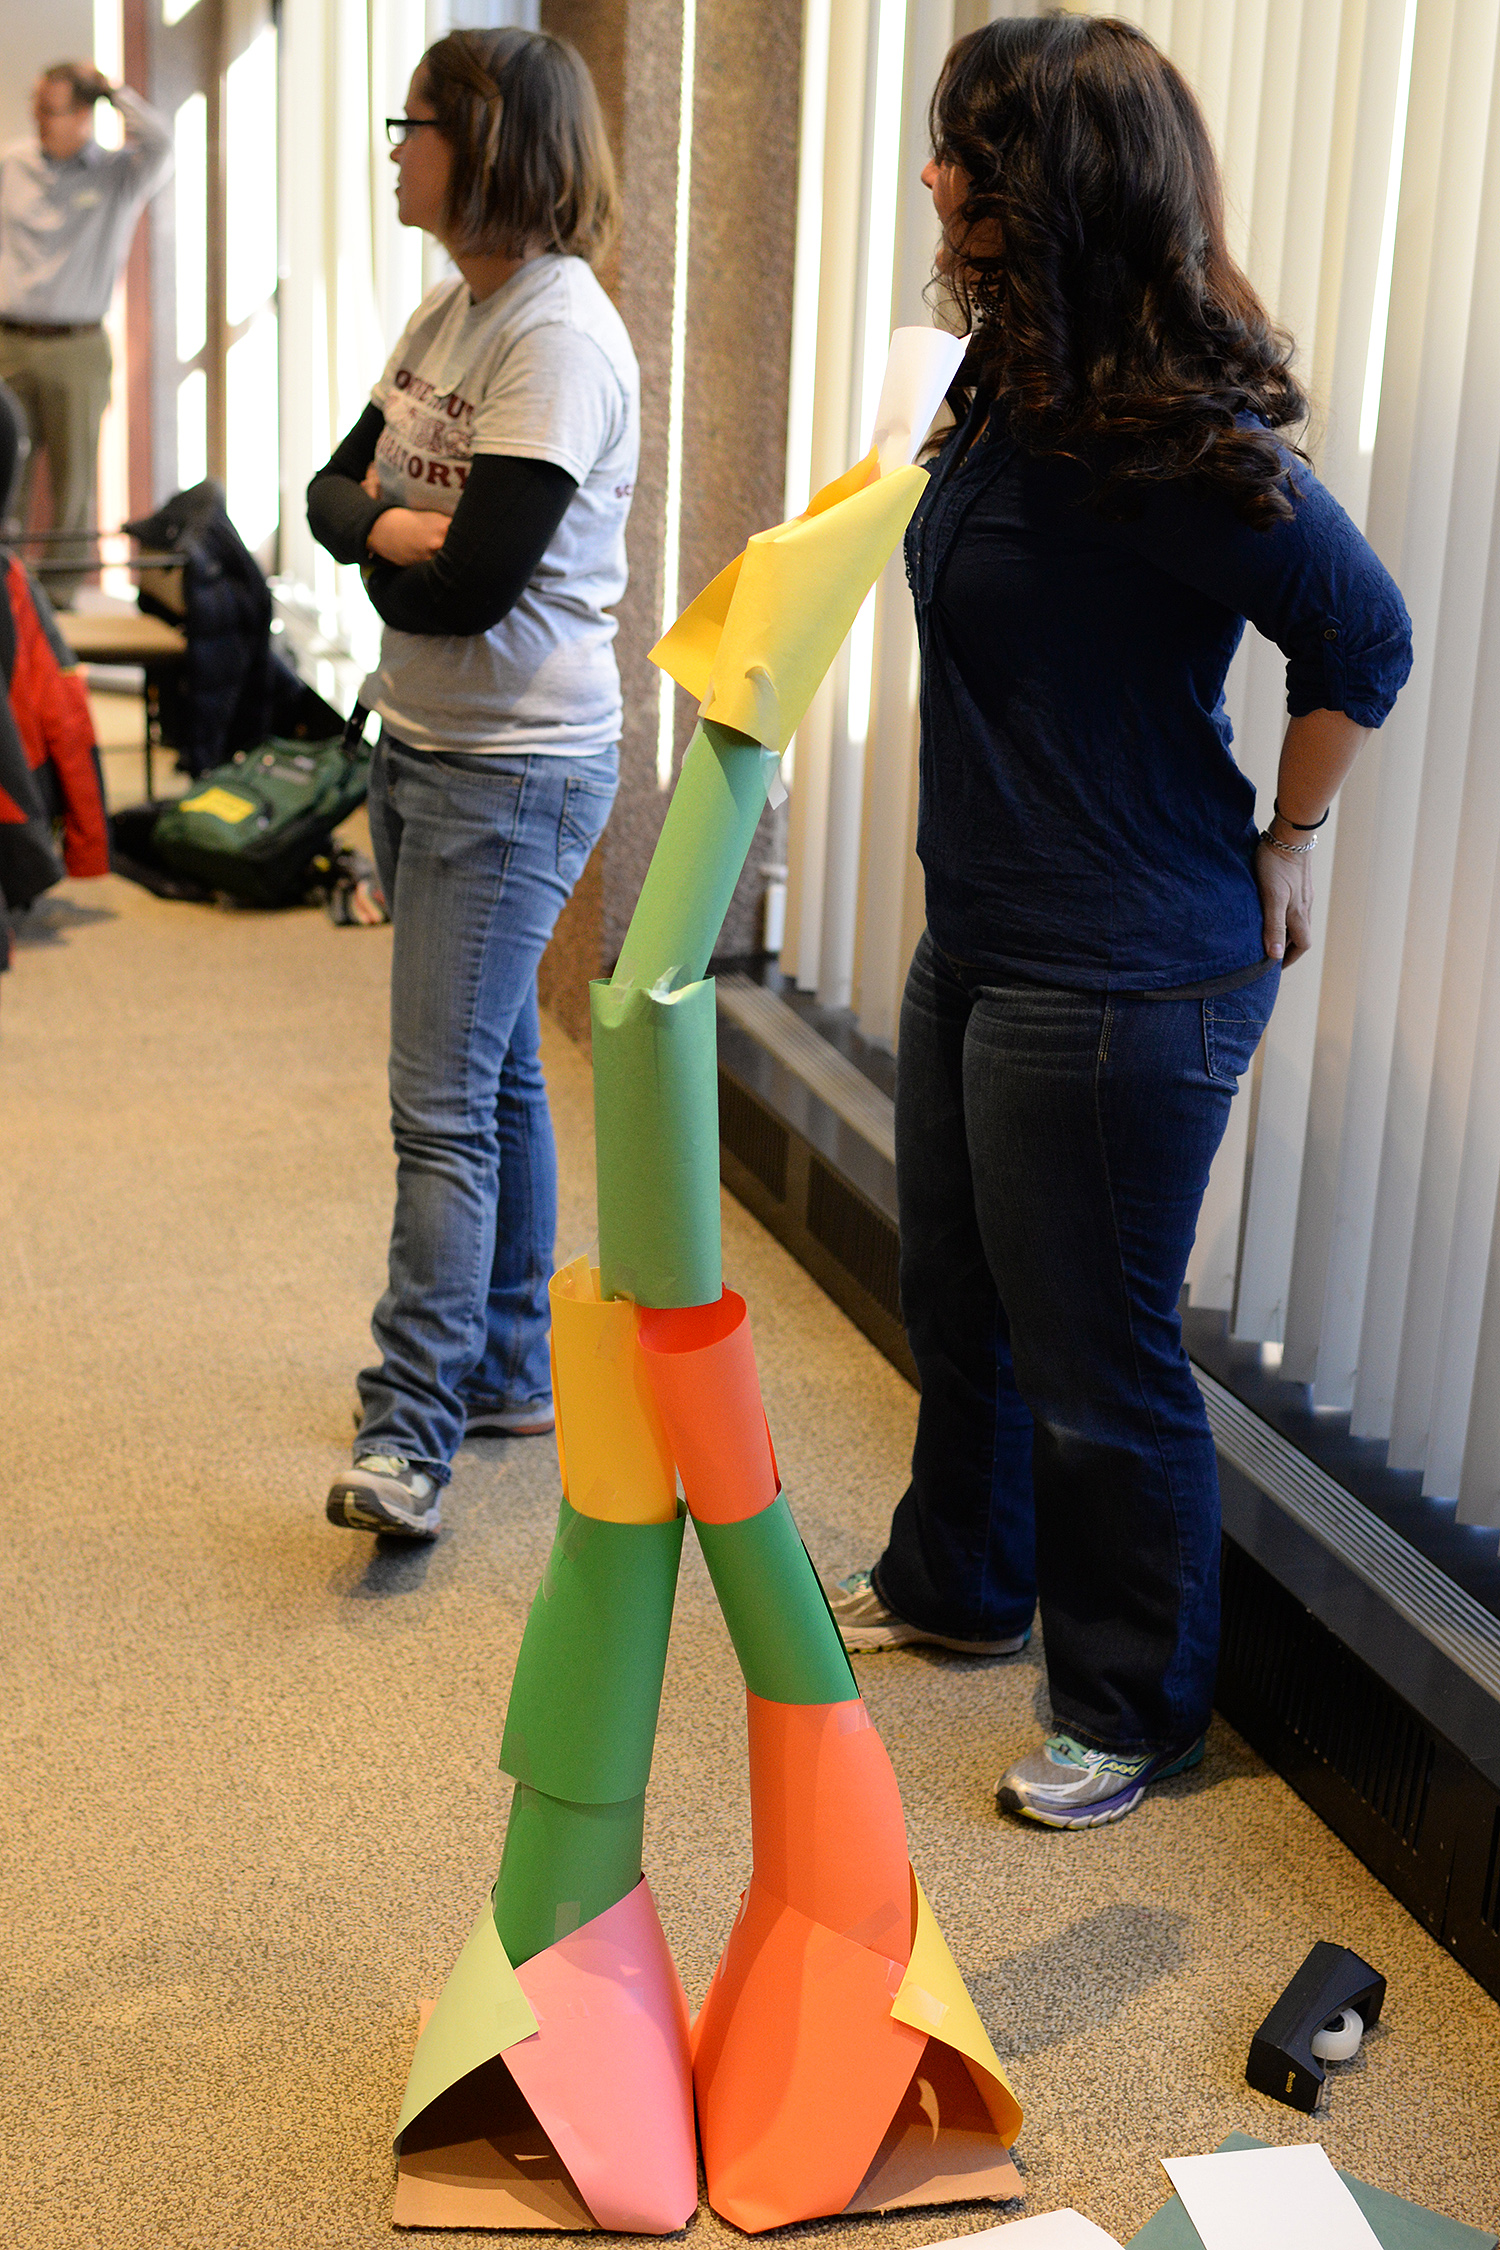 While none of the groups were able to build a five-foot tall structure, the winning group's tower was 54.5 inches high (4.5 feet). 